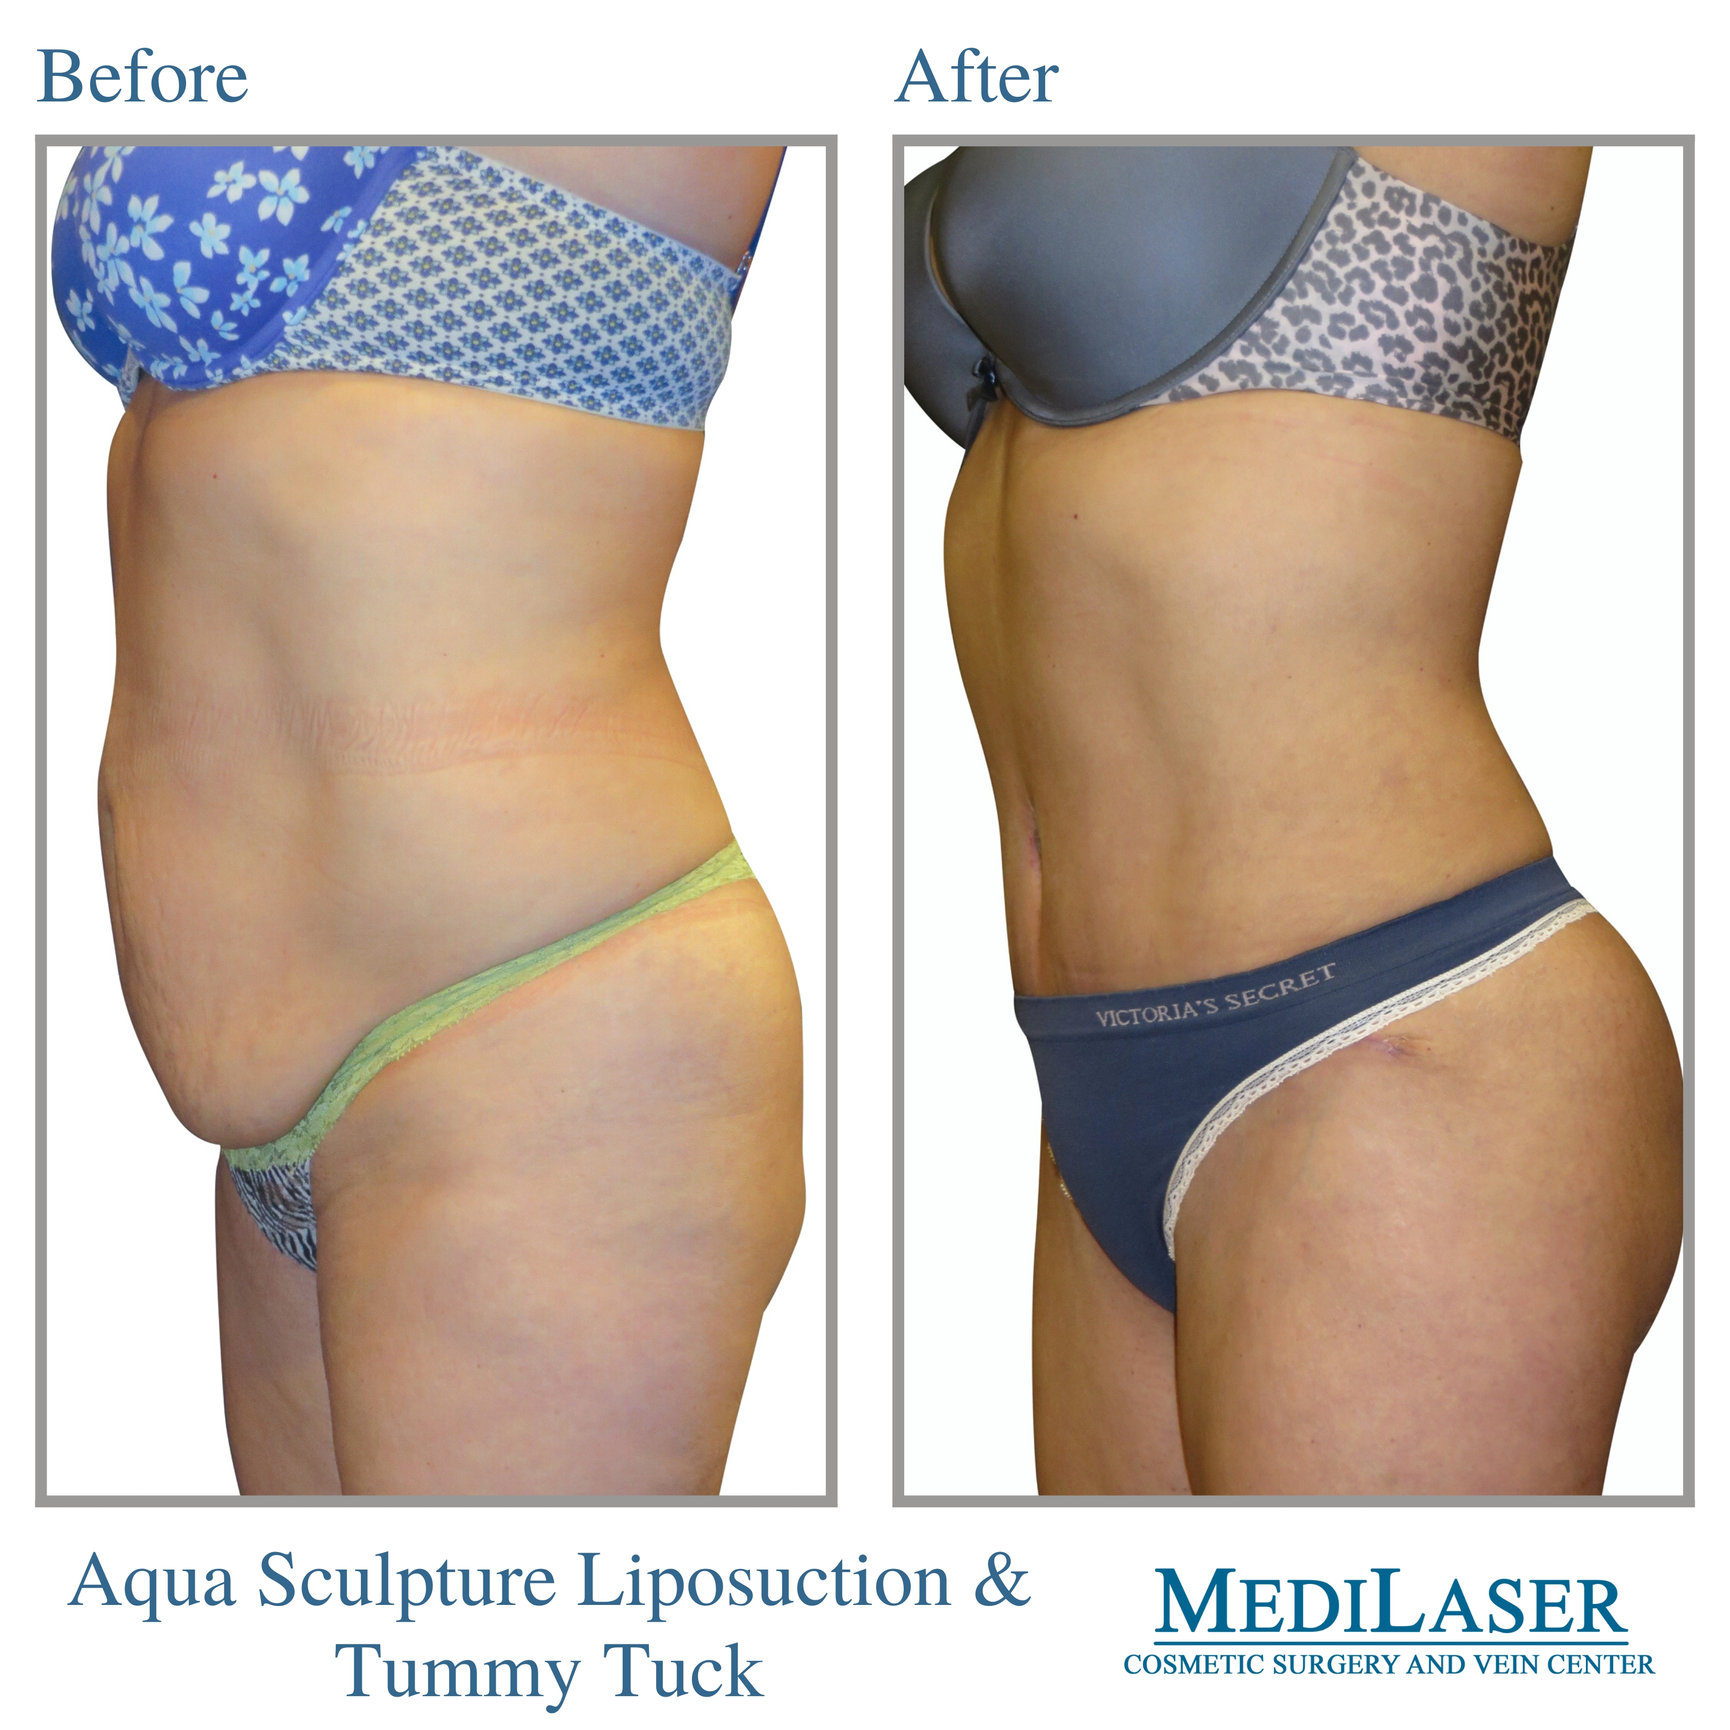 Tummy Tuck Liposuction Before and After - Medilaser Surgery and Vein Center